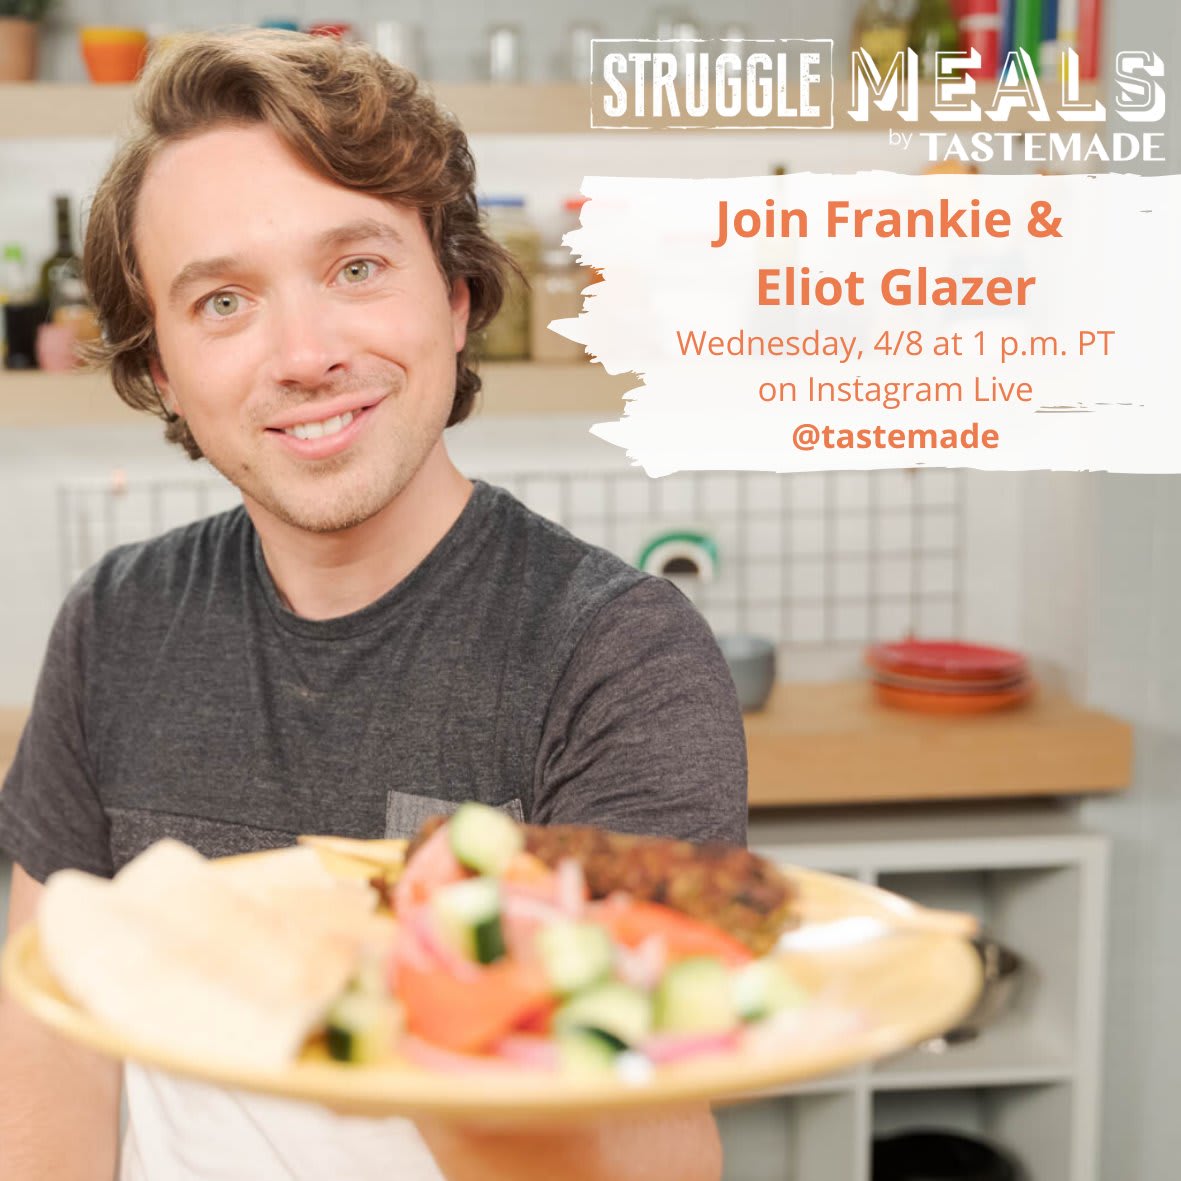 A new day means a new virtual Struggle Meals cooking show with @frankiecooks and guest @eliotglazer, joining remotely from his own home over on @Tastemade's Instagram today at 1 p.m. PT! Join us: